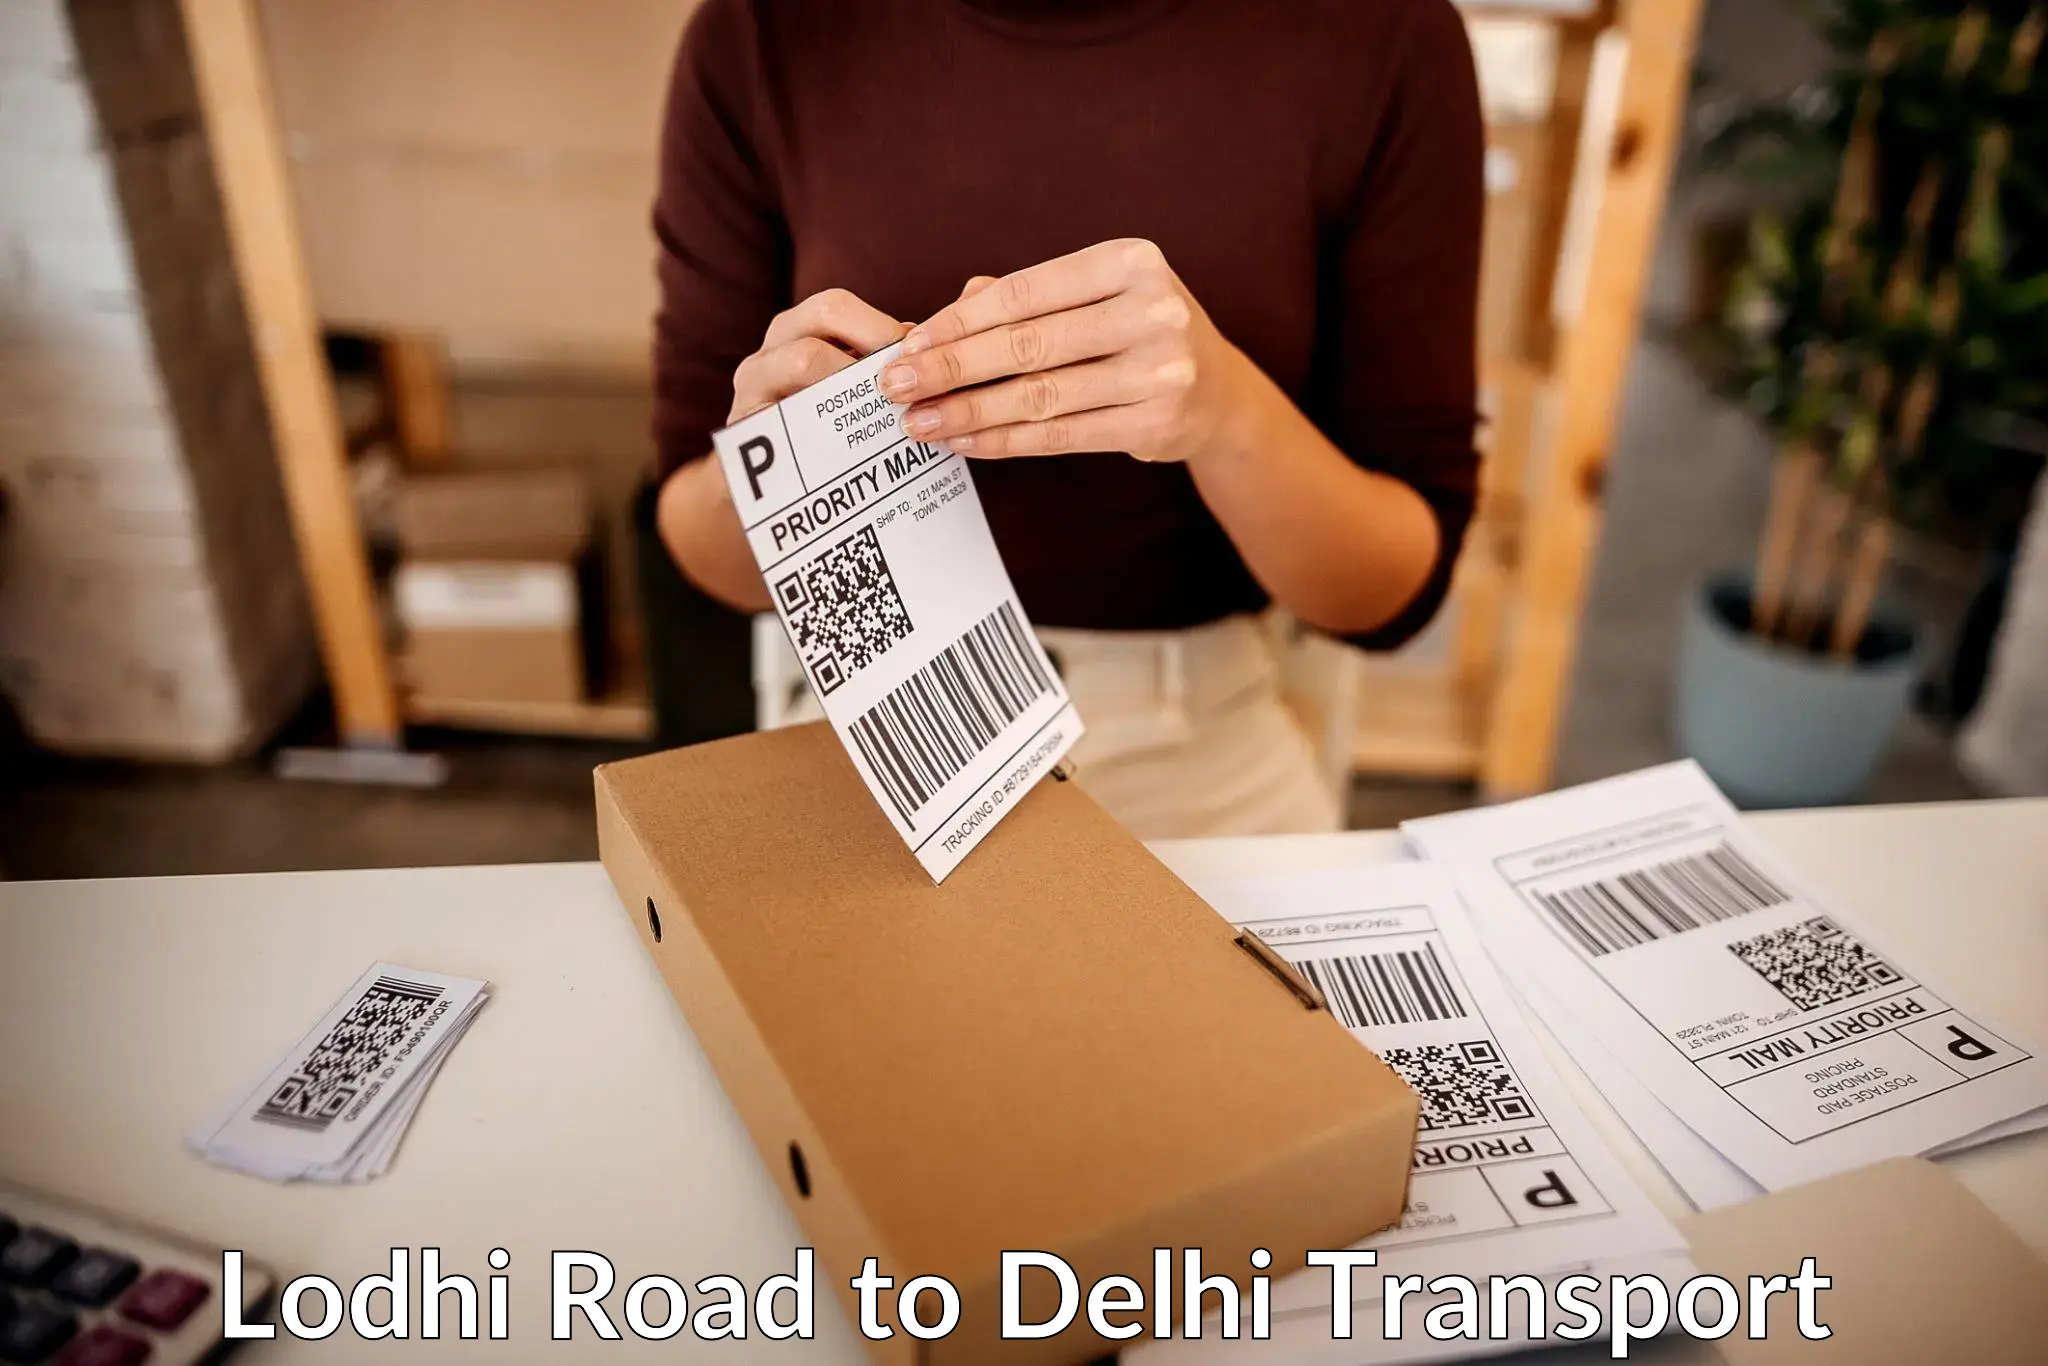 Interstate transport services Lodhi Road to Lodhi Road